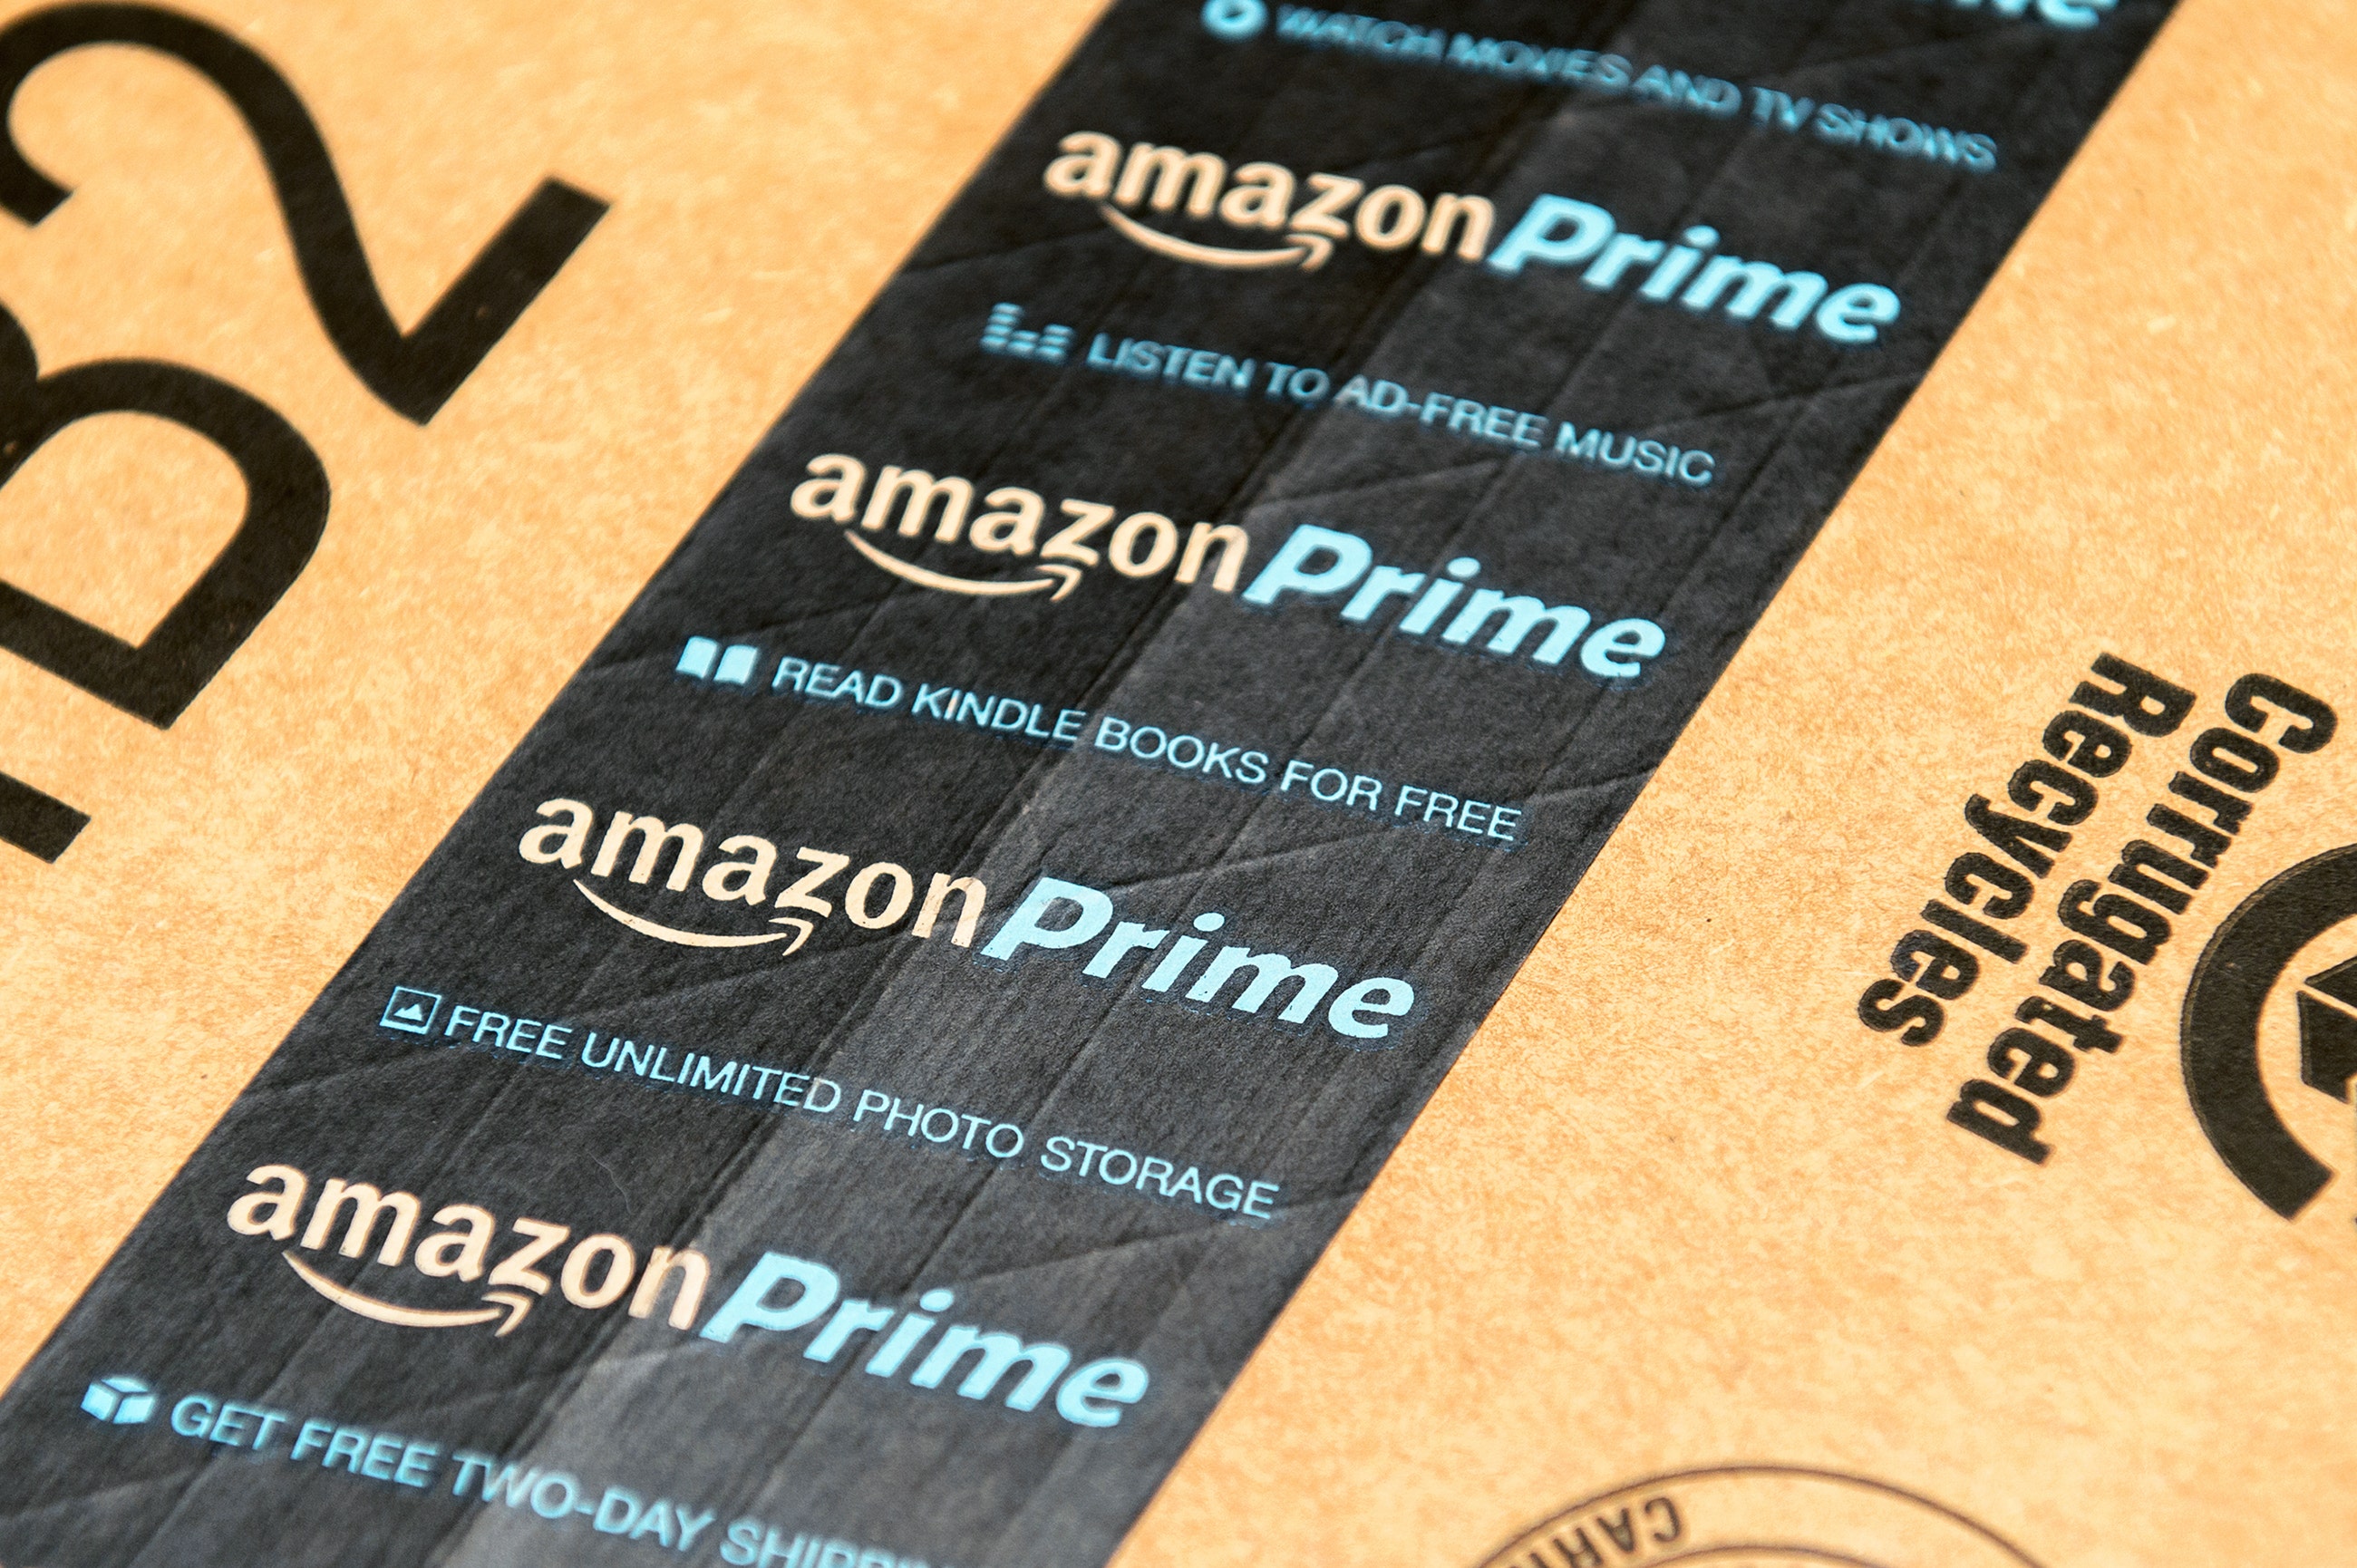 Amazon Q2 Earnings Highlights: Revenue Beat, Loss On Rivian Investment, Prime Day, Guidance And More